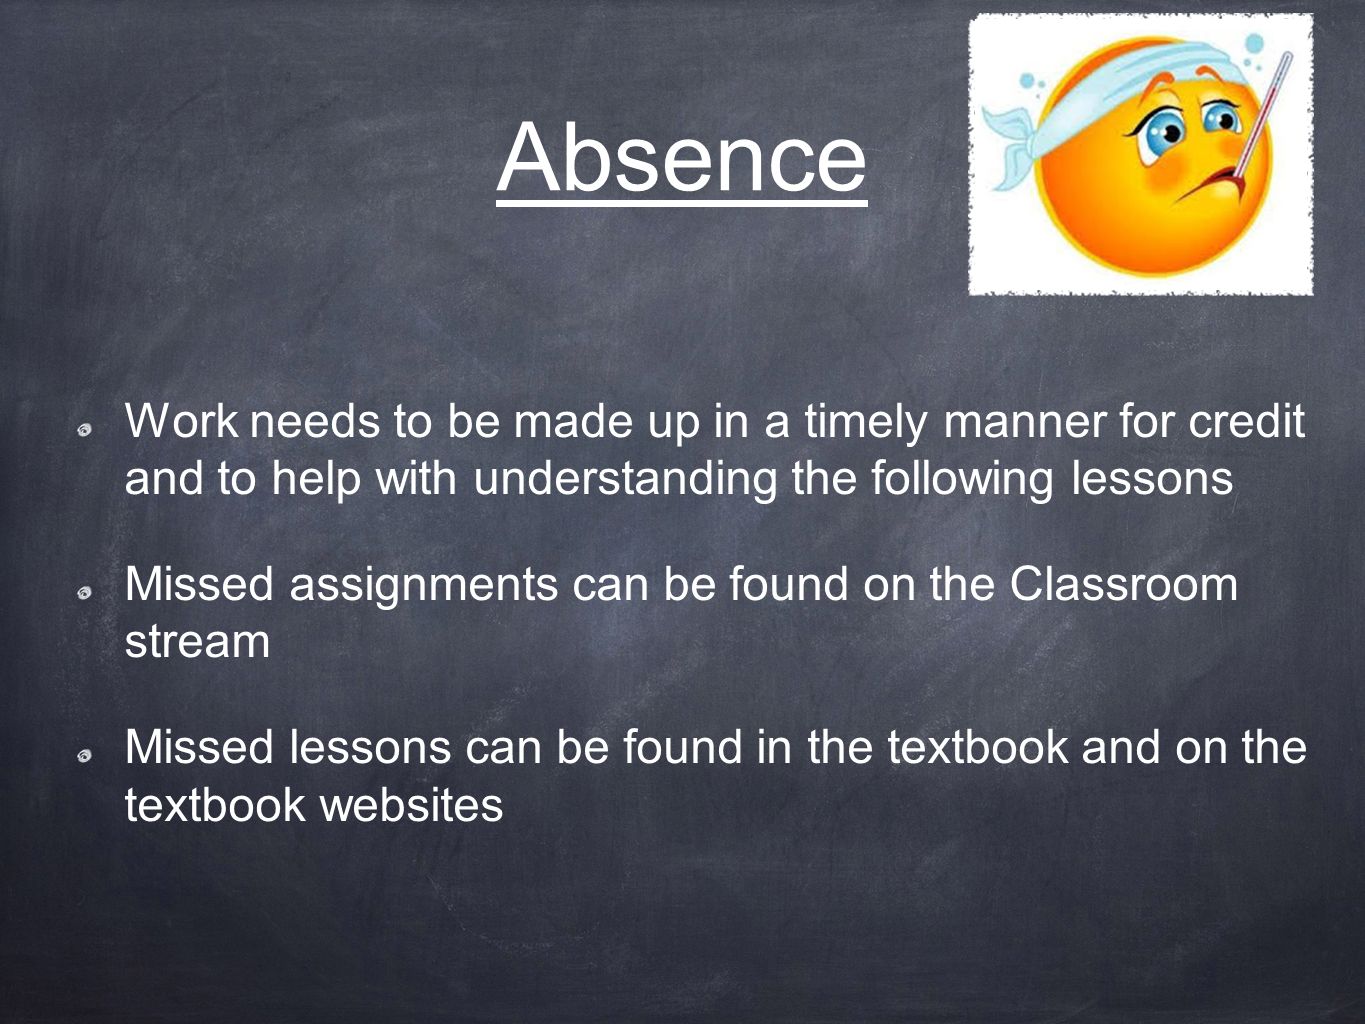 Absence Work needs to be made up in a timely manner for credit and to help with understanding the following lessons Missed assignments can be found on the Classroom stream Missed lessons can be found in the textbook and on the textbook websites